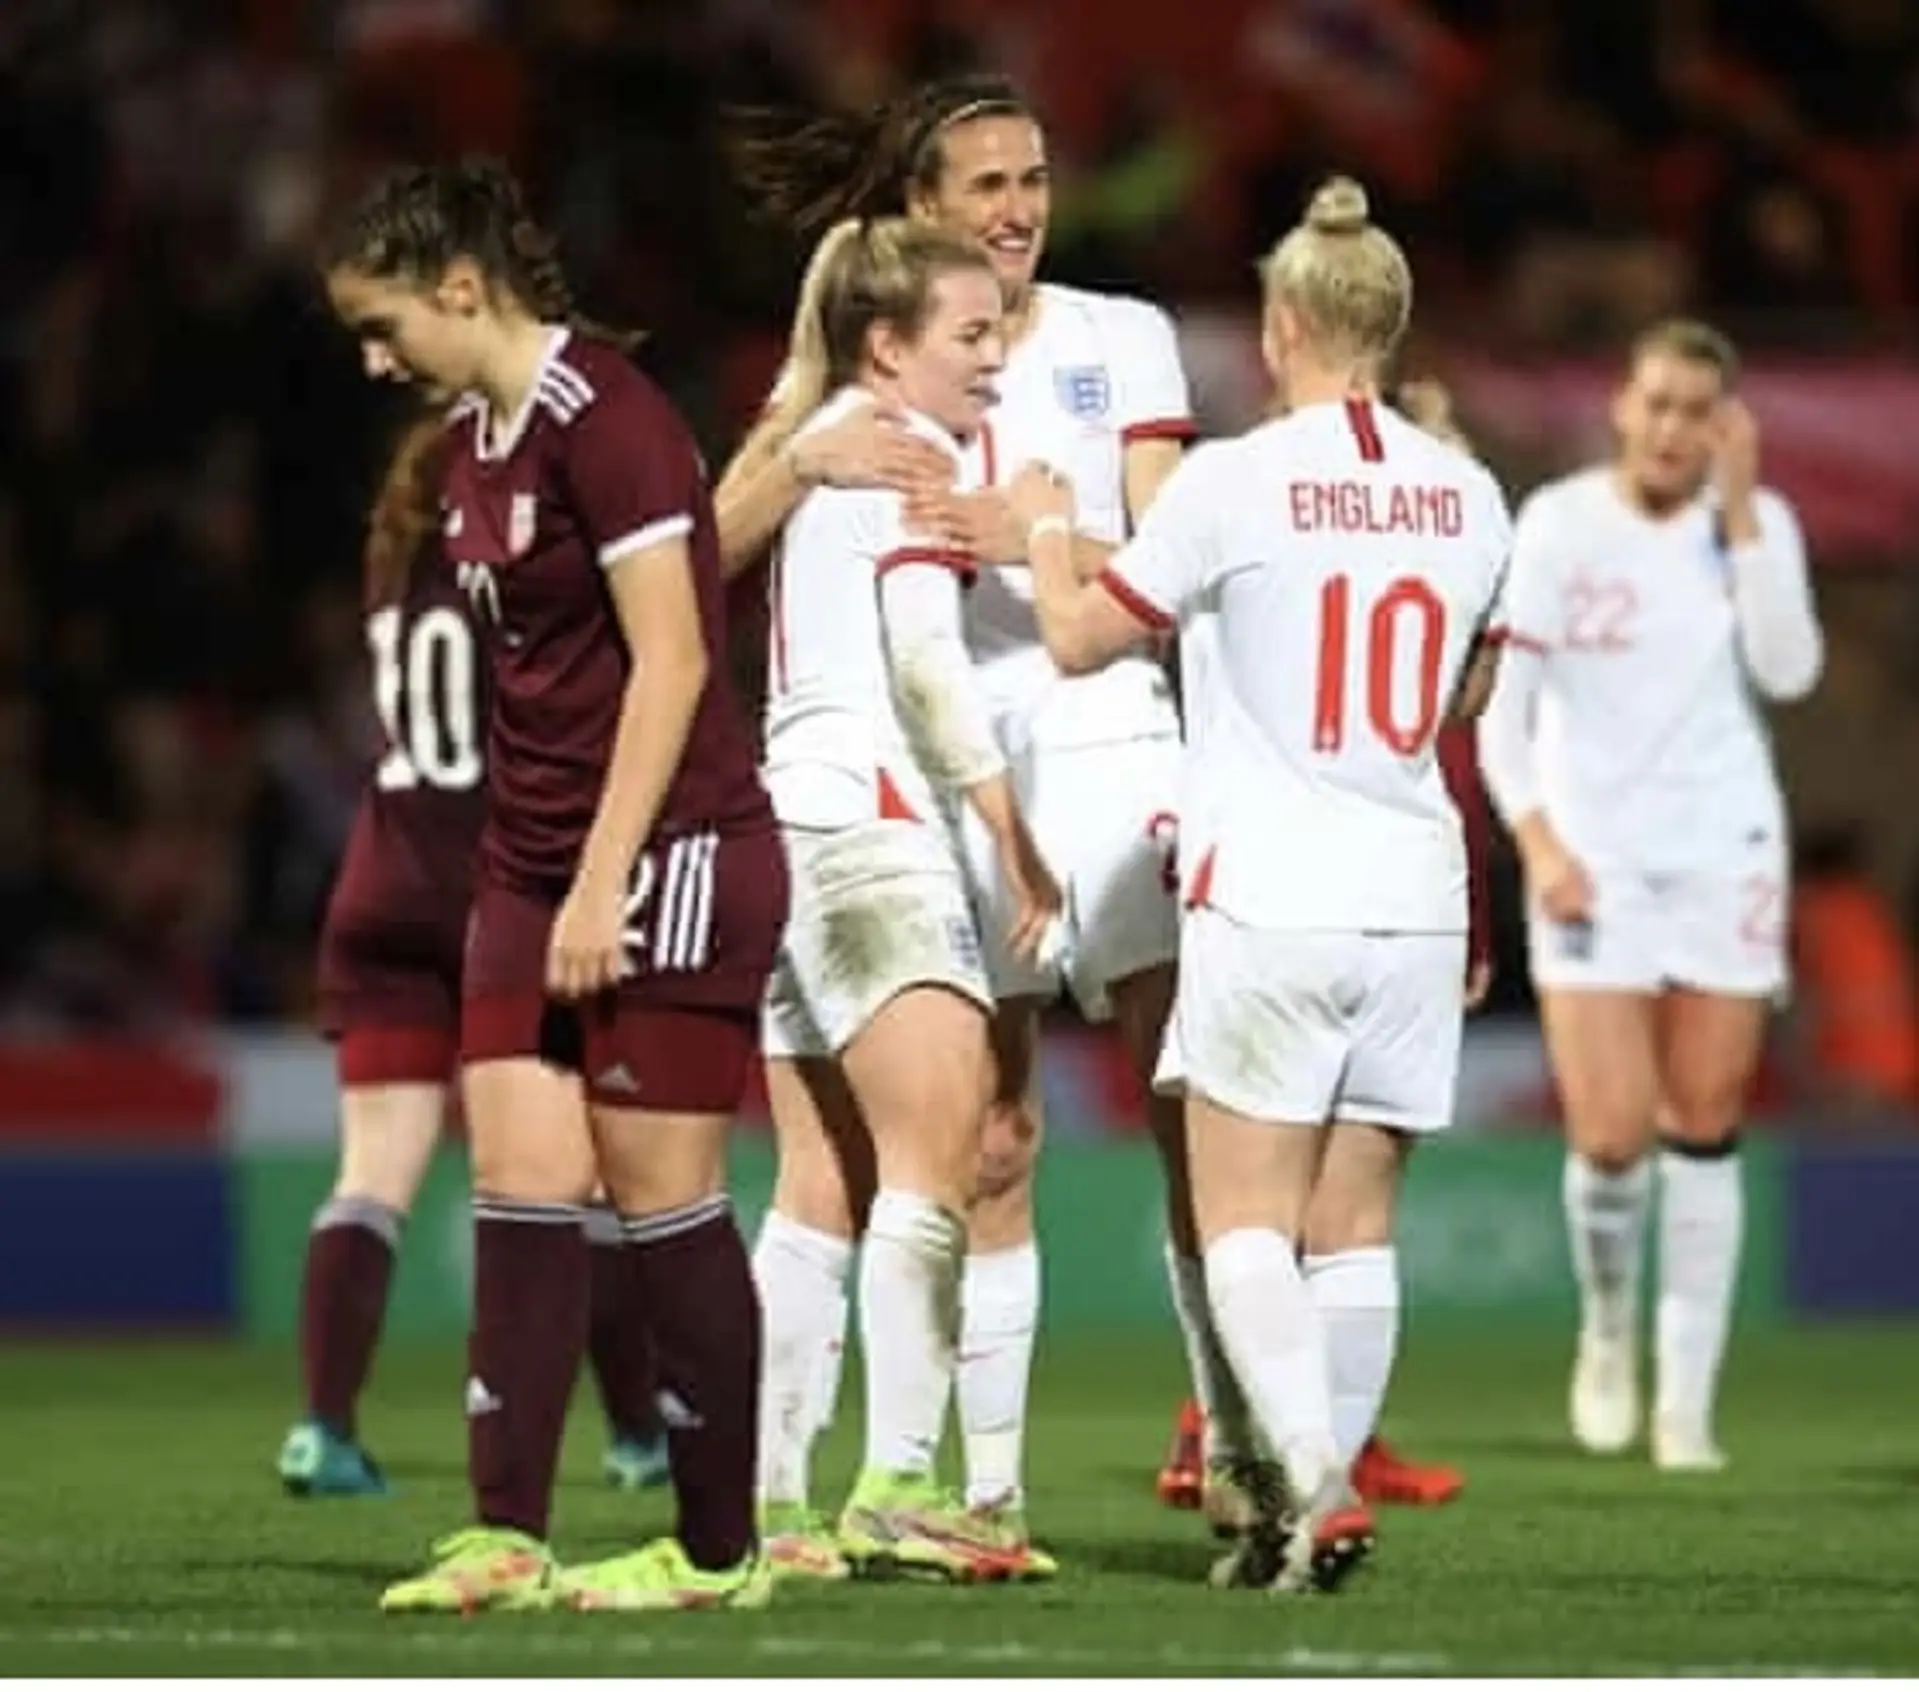 Can Chelsea men learn how to score from England women?